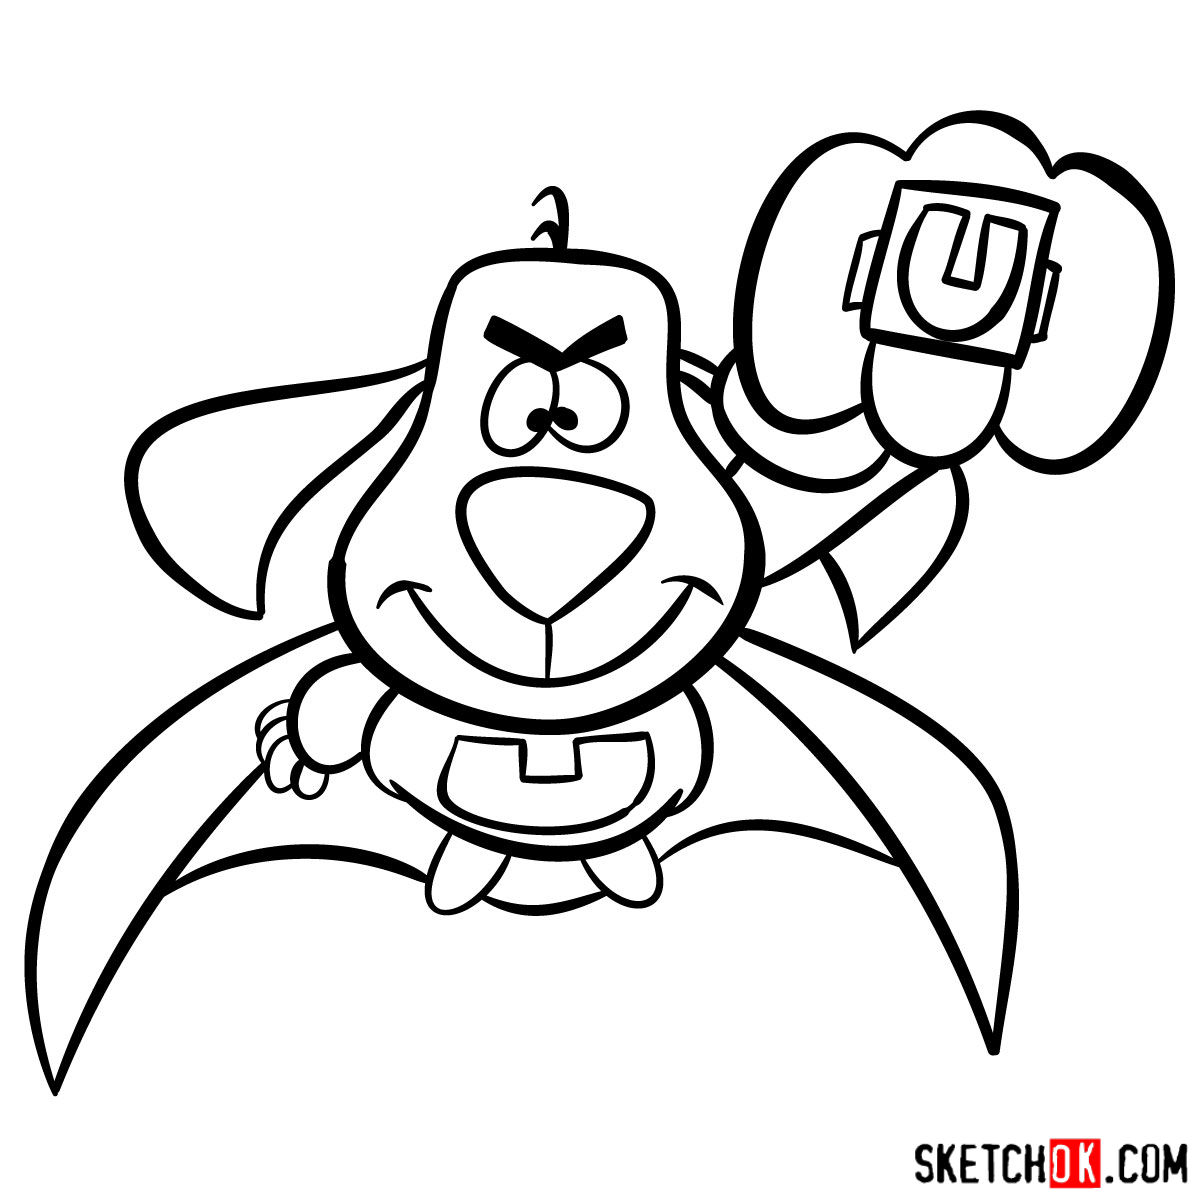 How to draw Underdog - step 11